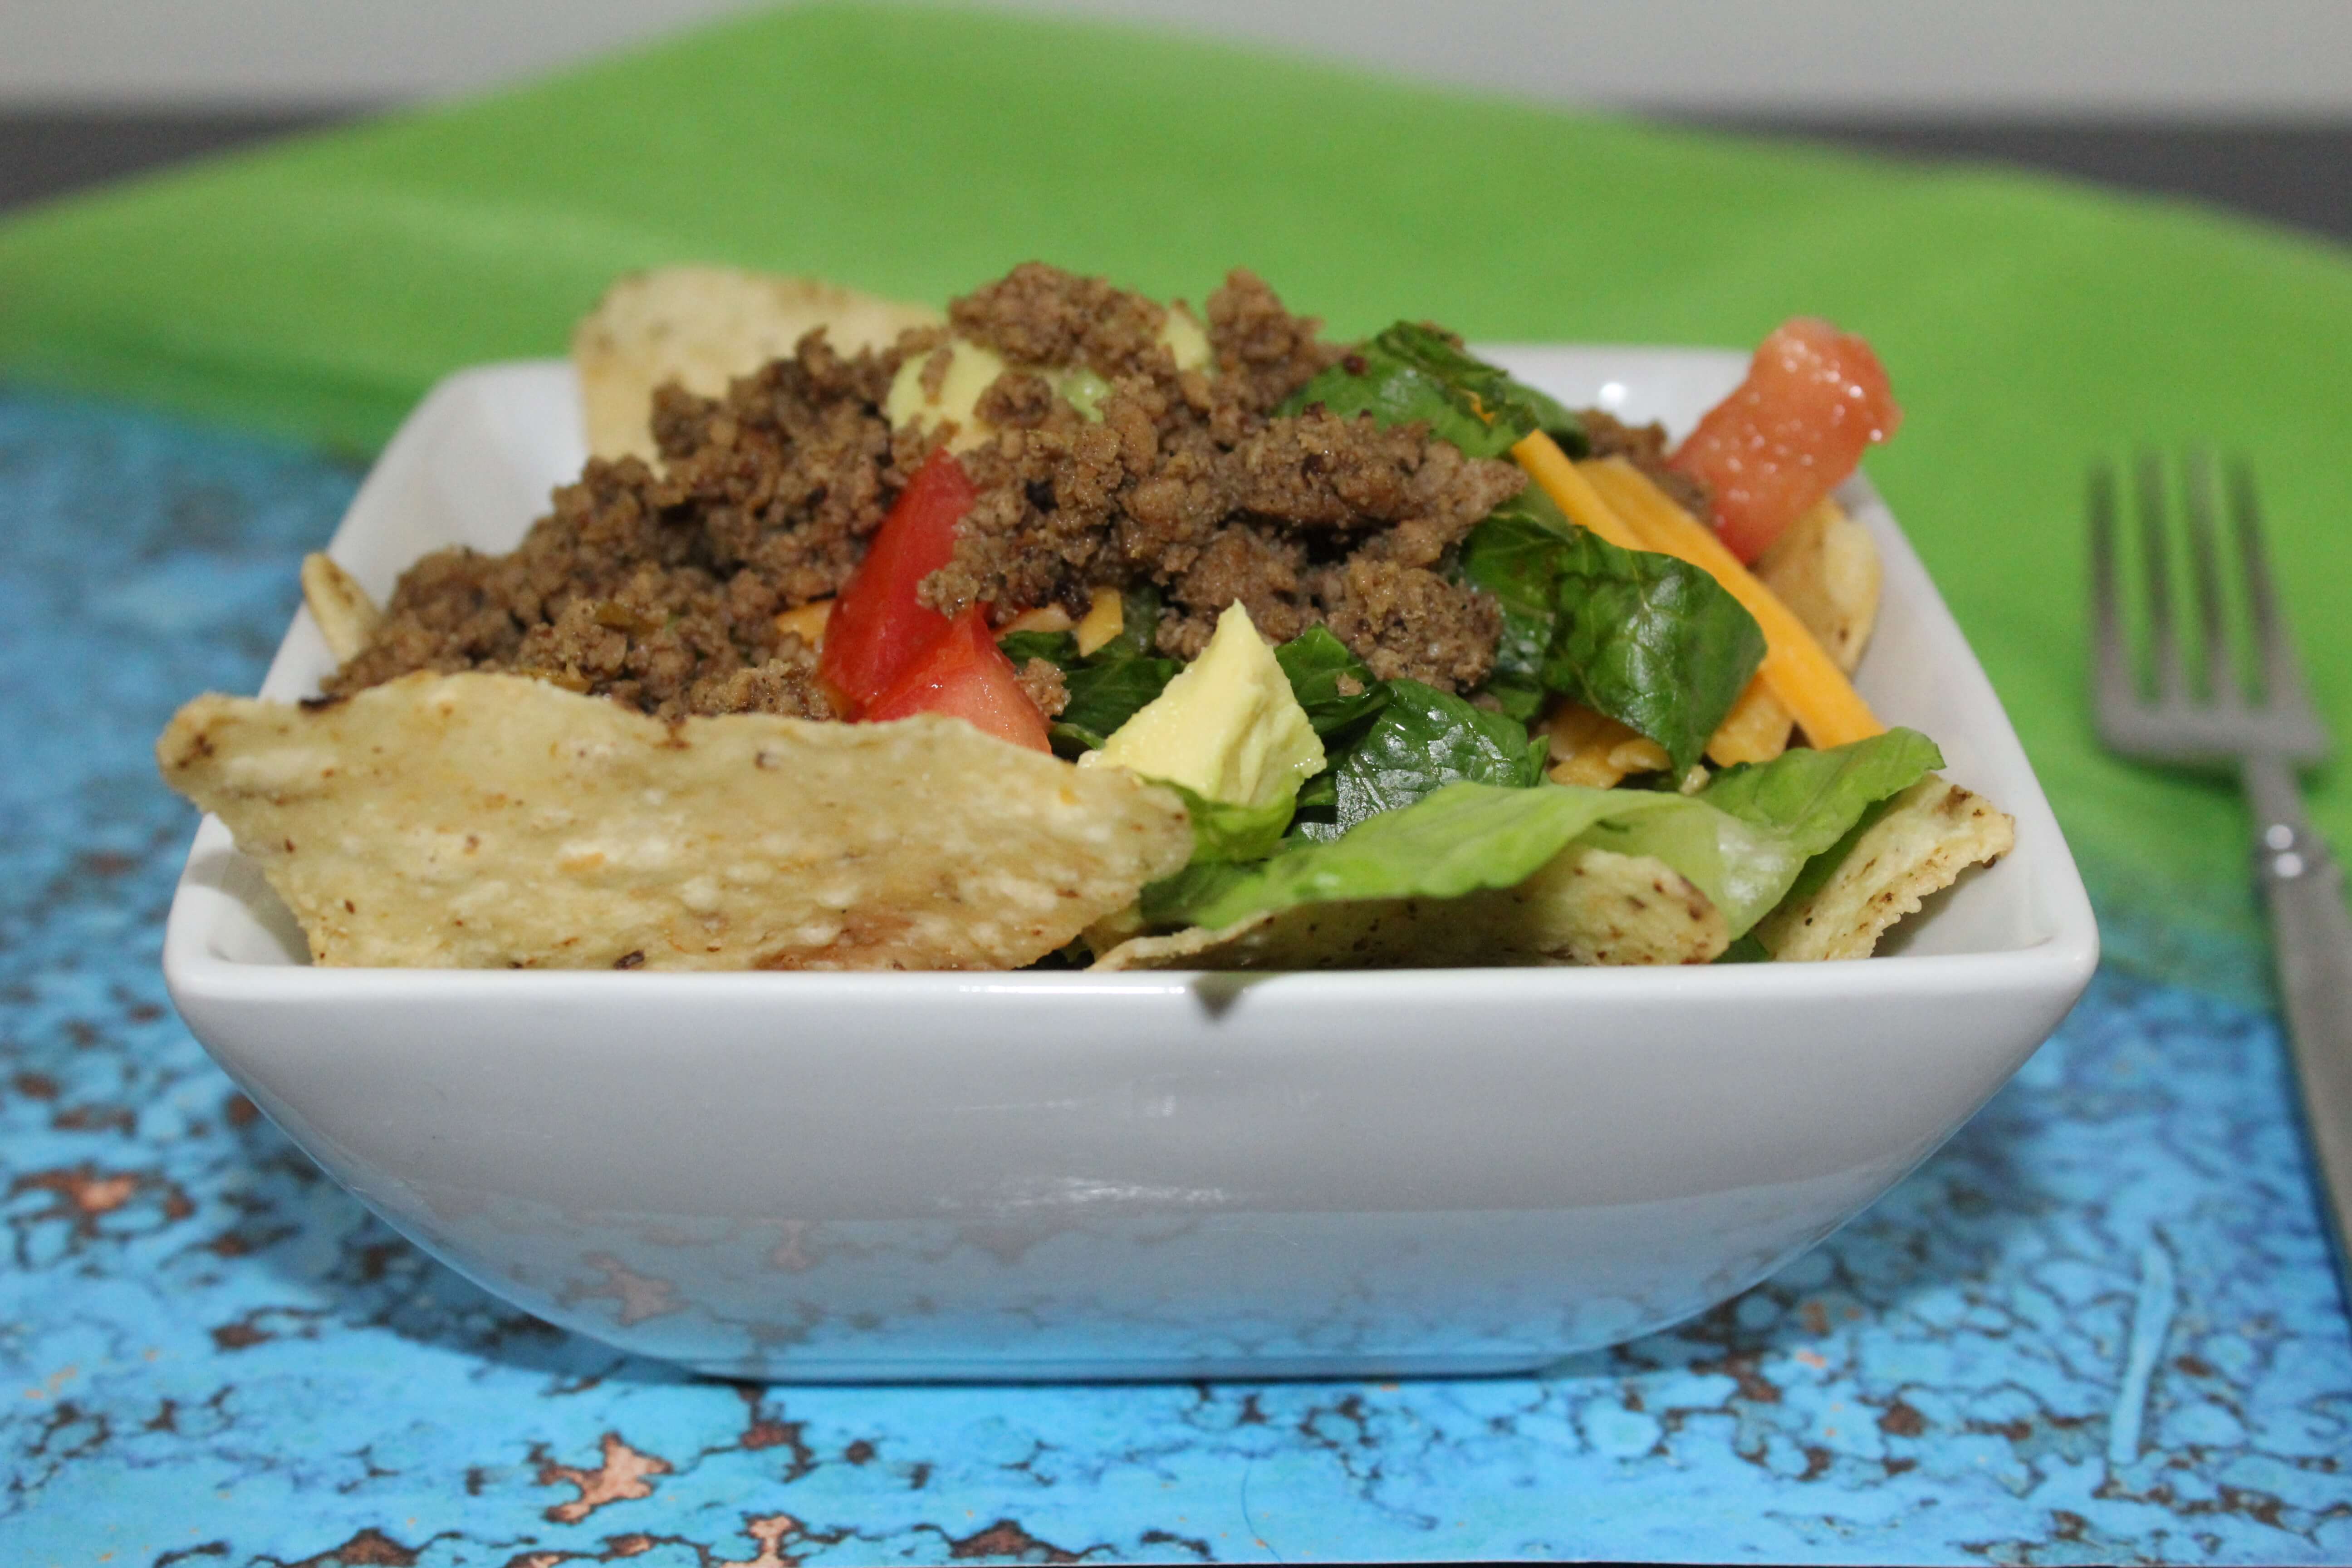 This super easy taco meat recipe is perfect for my next Taco Tuesday!